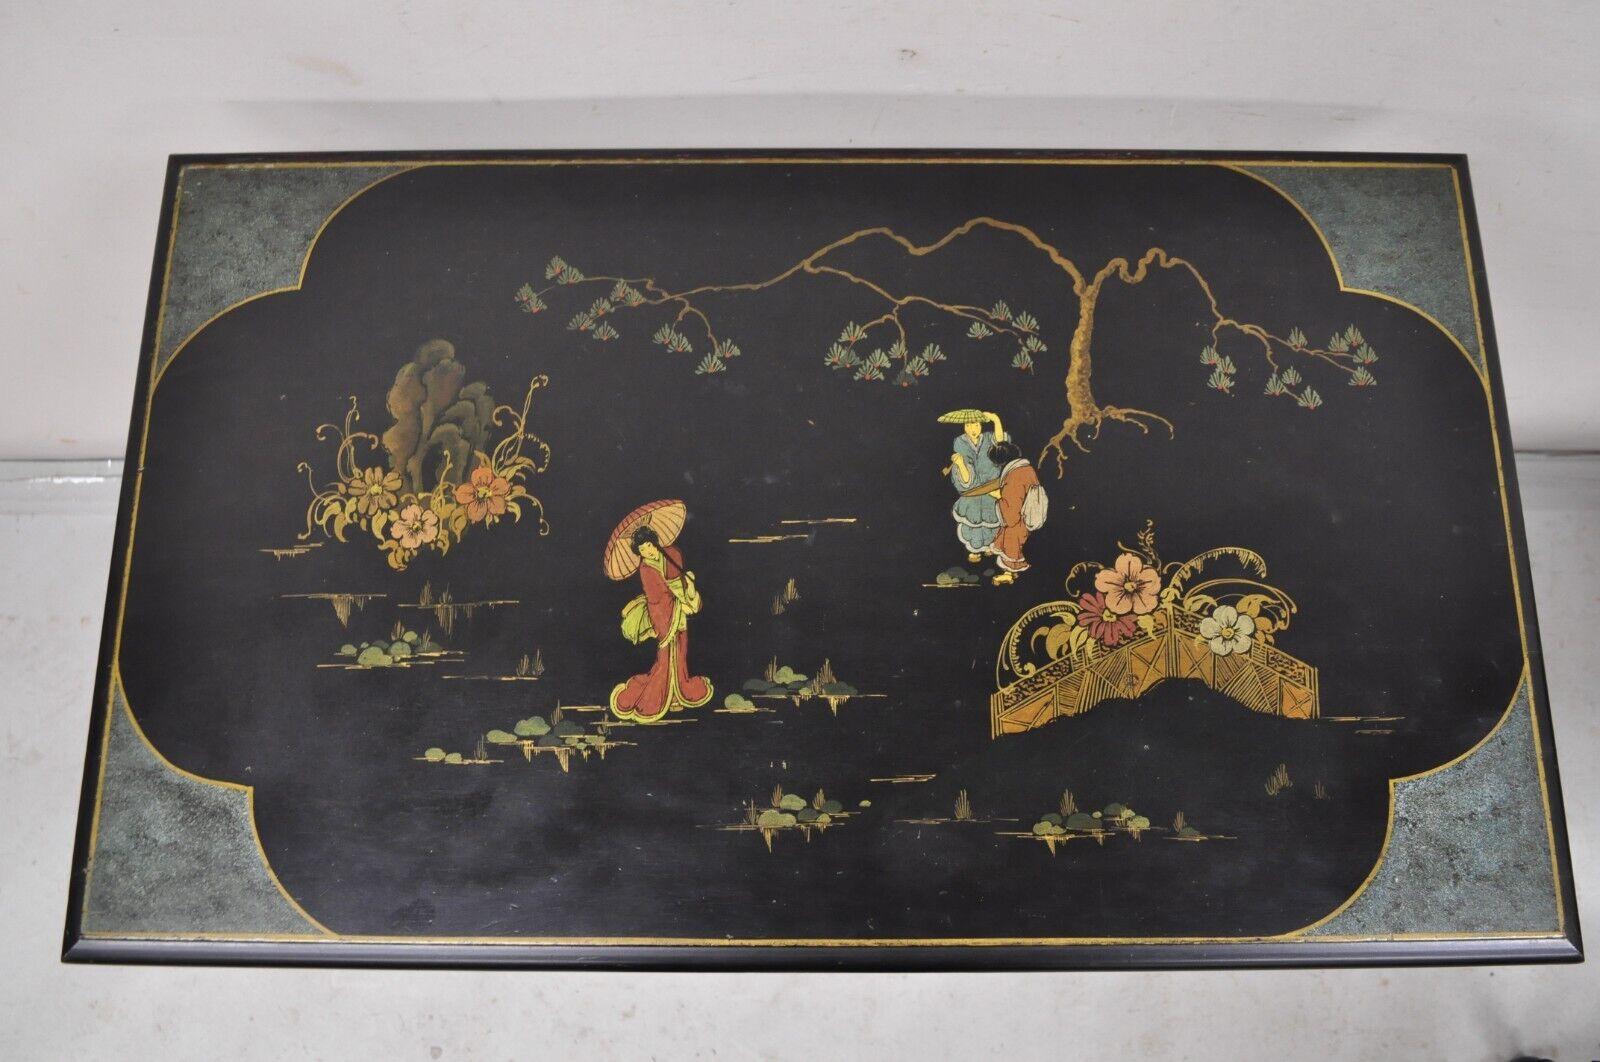 20th Century Vtg Chinoiserie Asian Inspired Black Nesting Side Tables by Paalman - Set of 3 For Sale